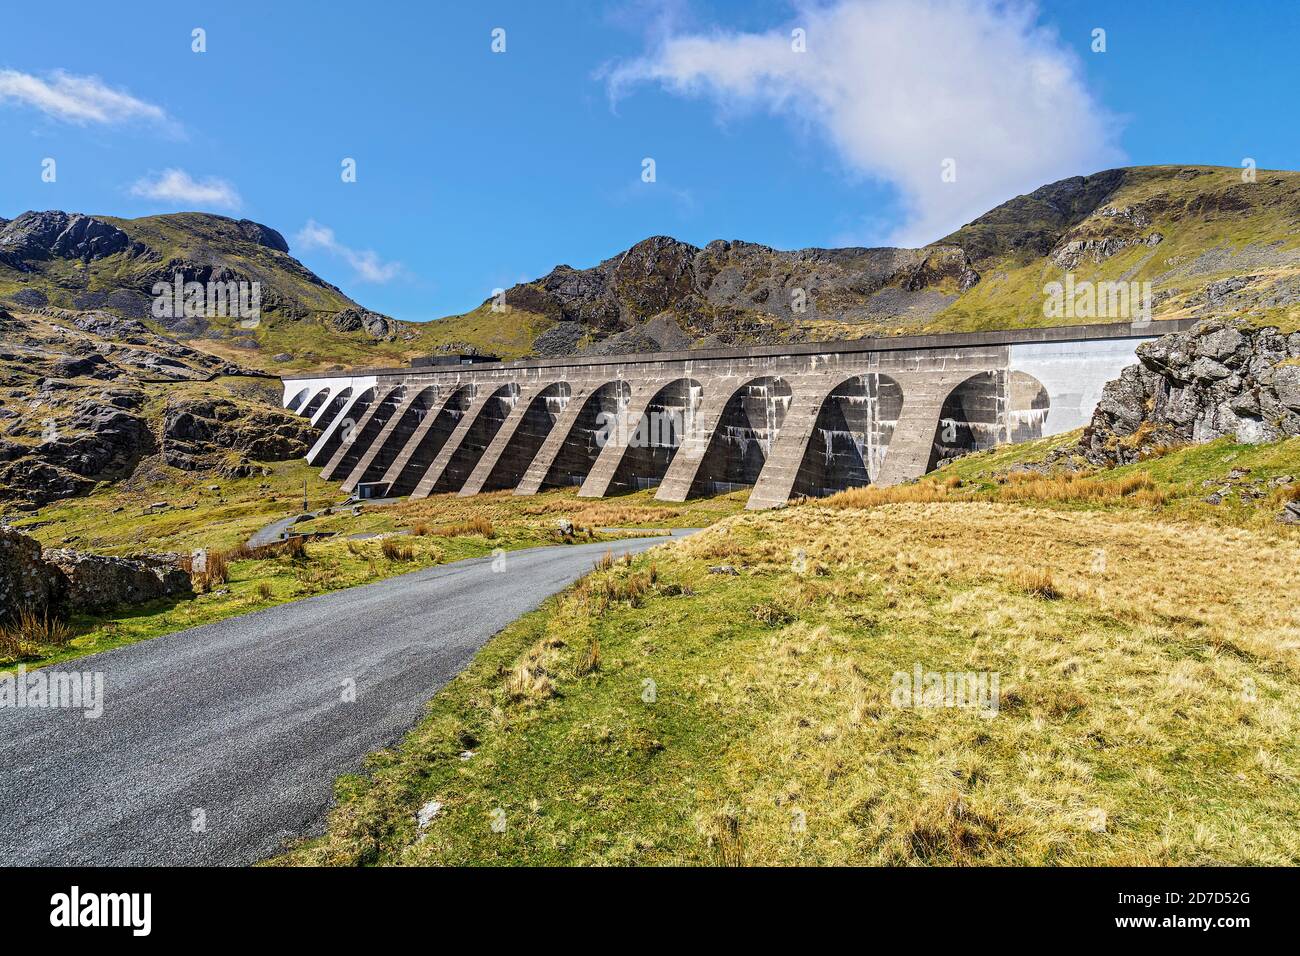 Llyn Stwlan damn used for pumped storage hydro electricity generation situated in Moelwyn Mountains above Tanygrisiau near Blaenau Festiniog Wales UK Stock Photo